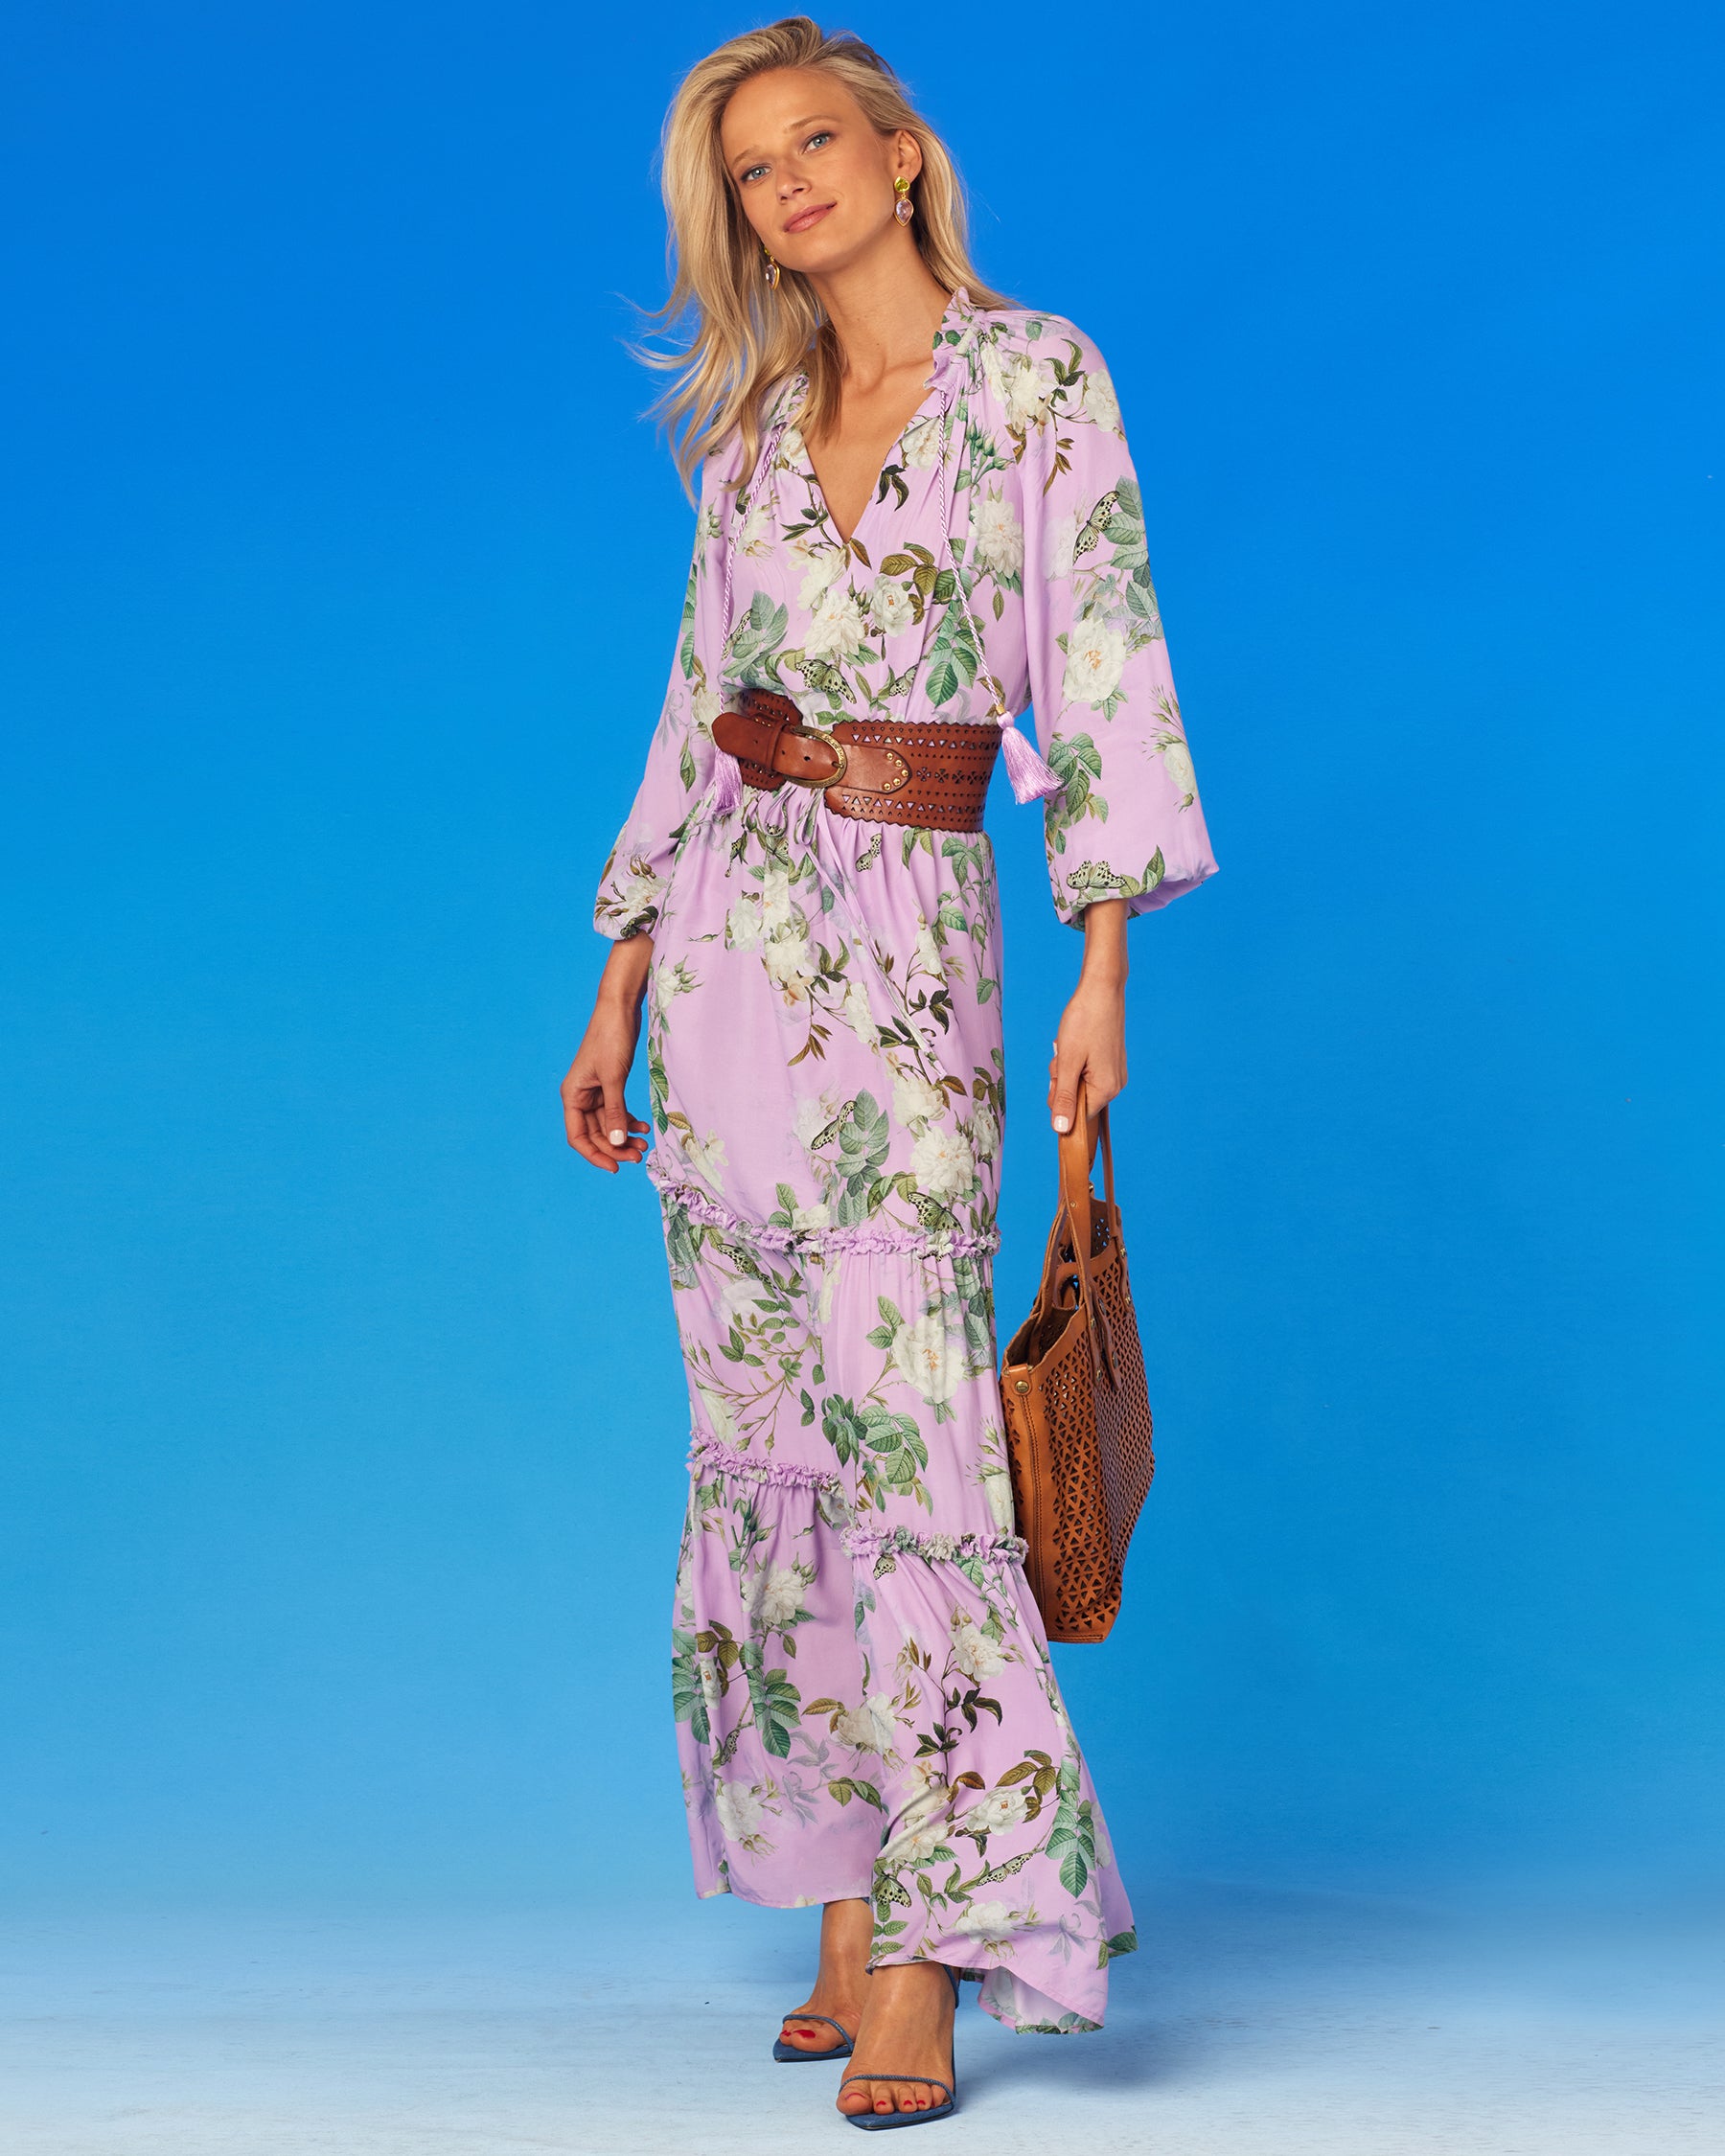 Gwendolyn Ruffle Drawstring Maxi Dress in English Garden-Side View with Campomaggi Accessories